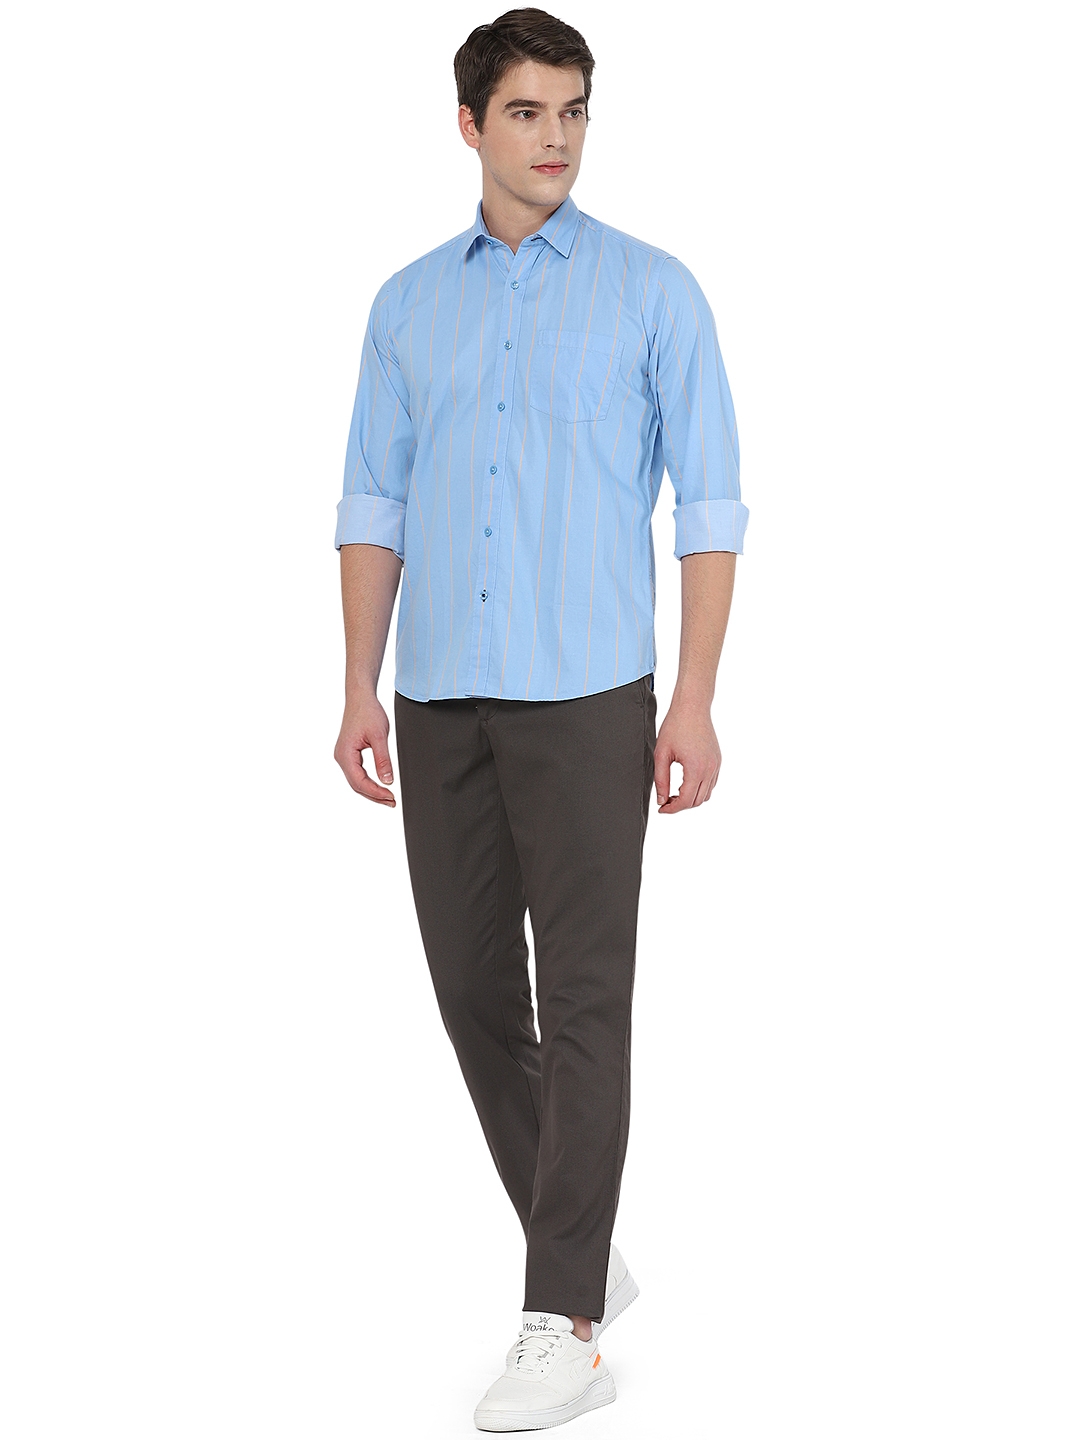 Greenfibre | Light Blue Striped Slim Fit Casual Shirt | Greenfibre 3